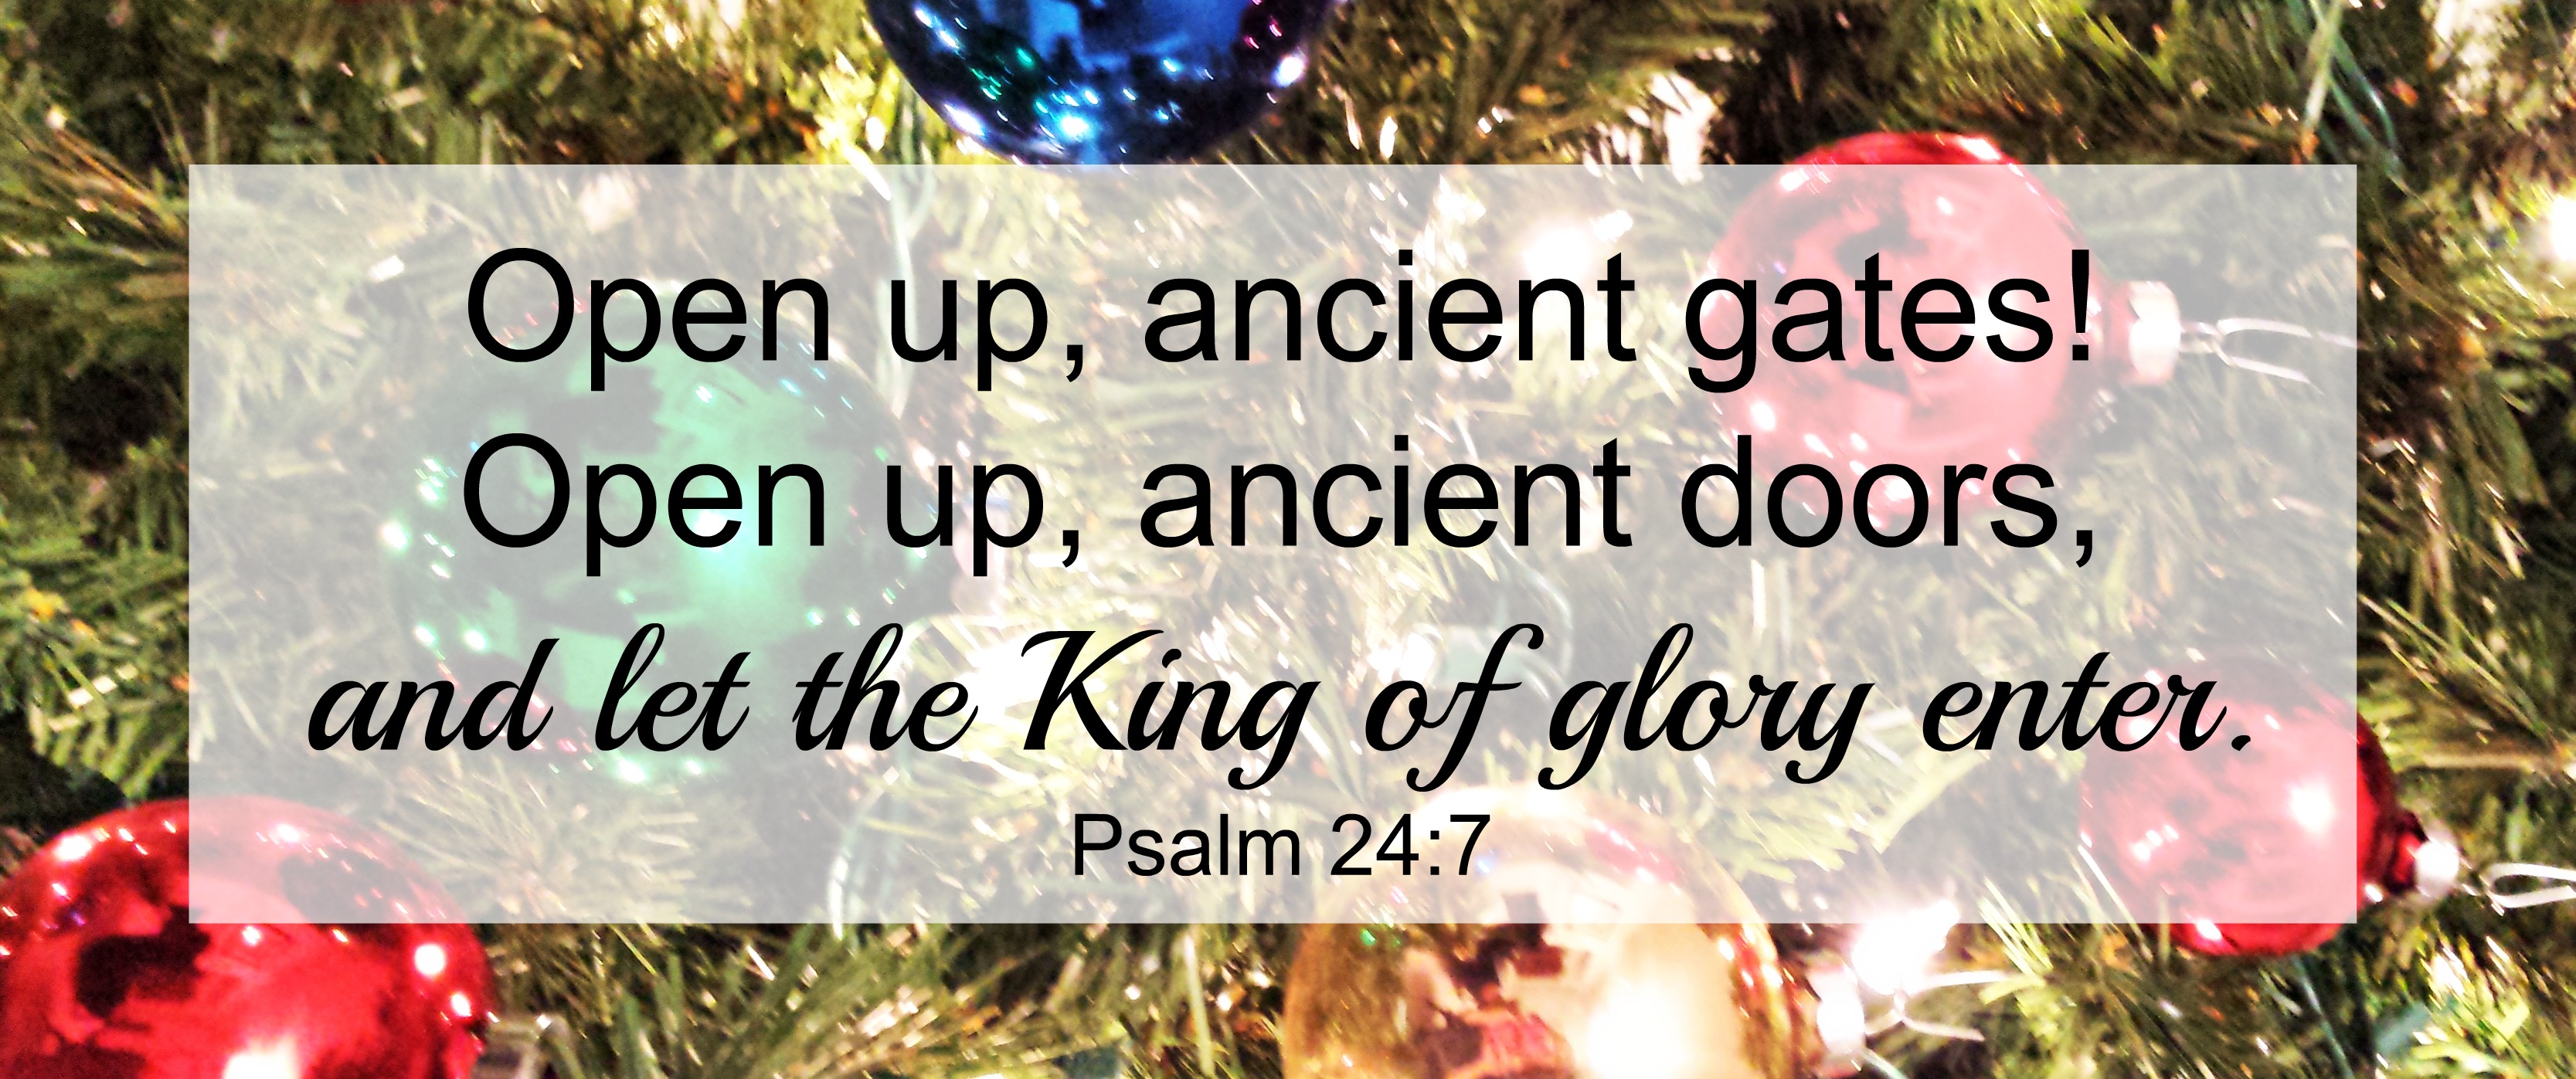 Advent King of Glory Enter scripture